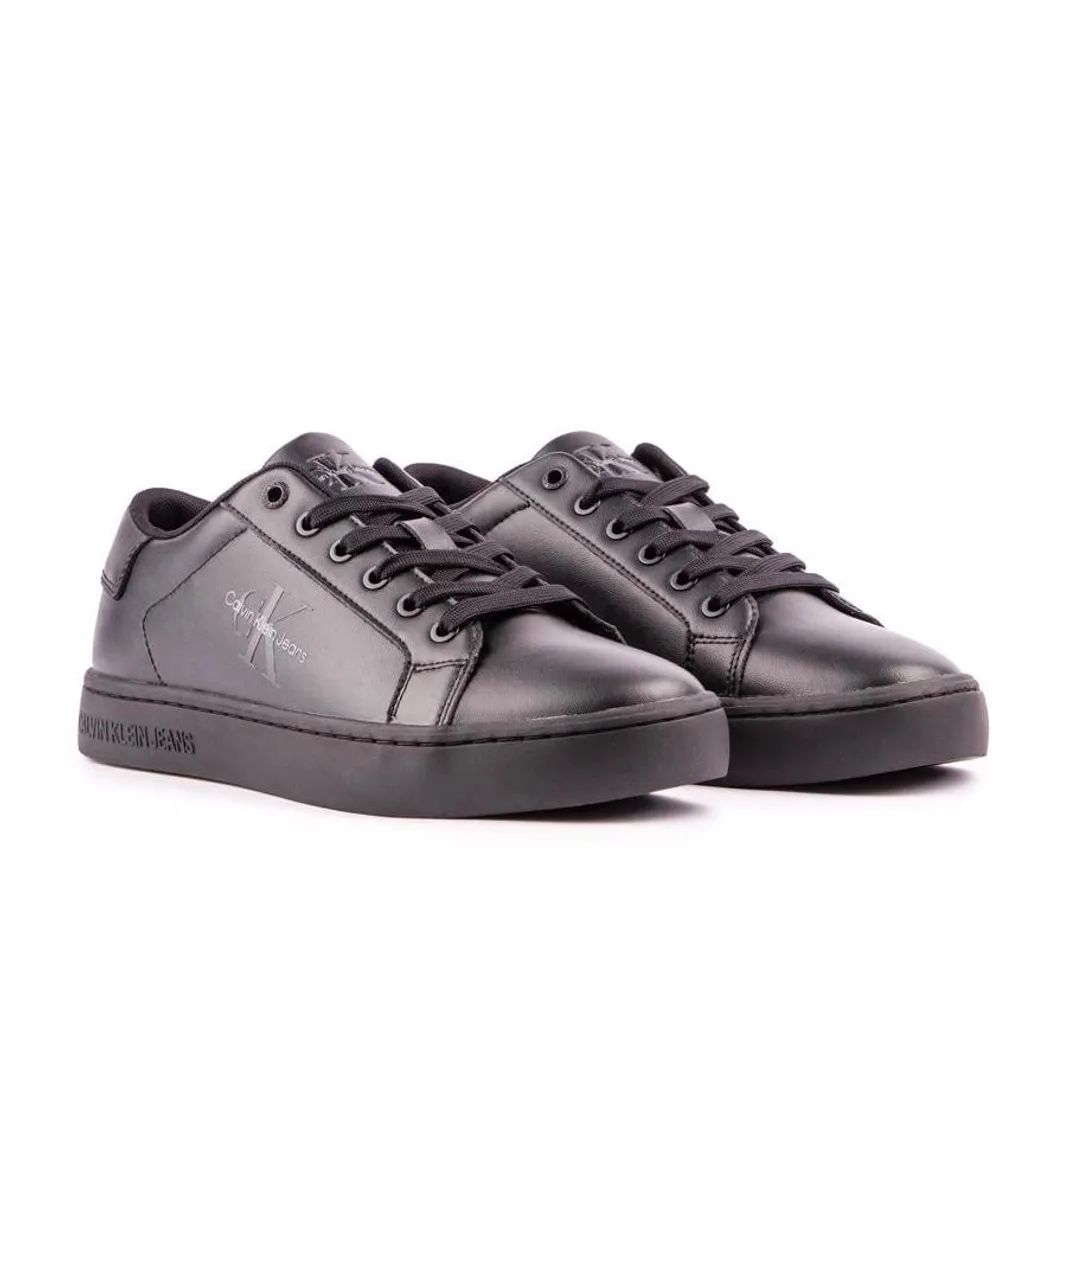 Calvin Klein Jeans Mens Cup Trainers - Black